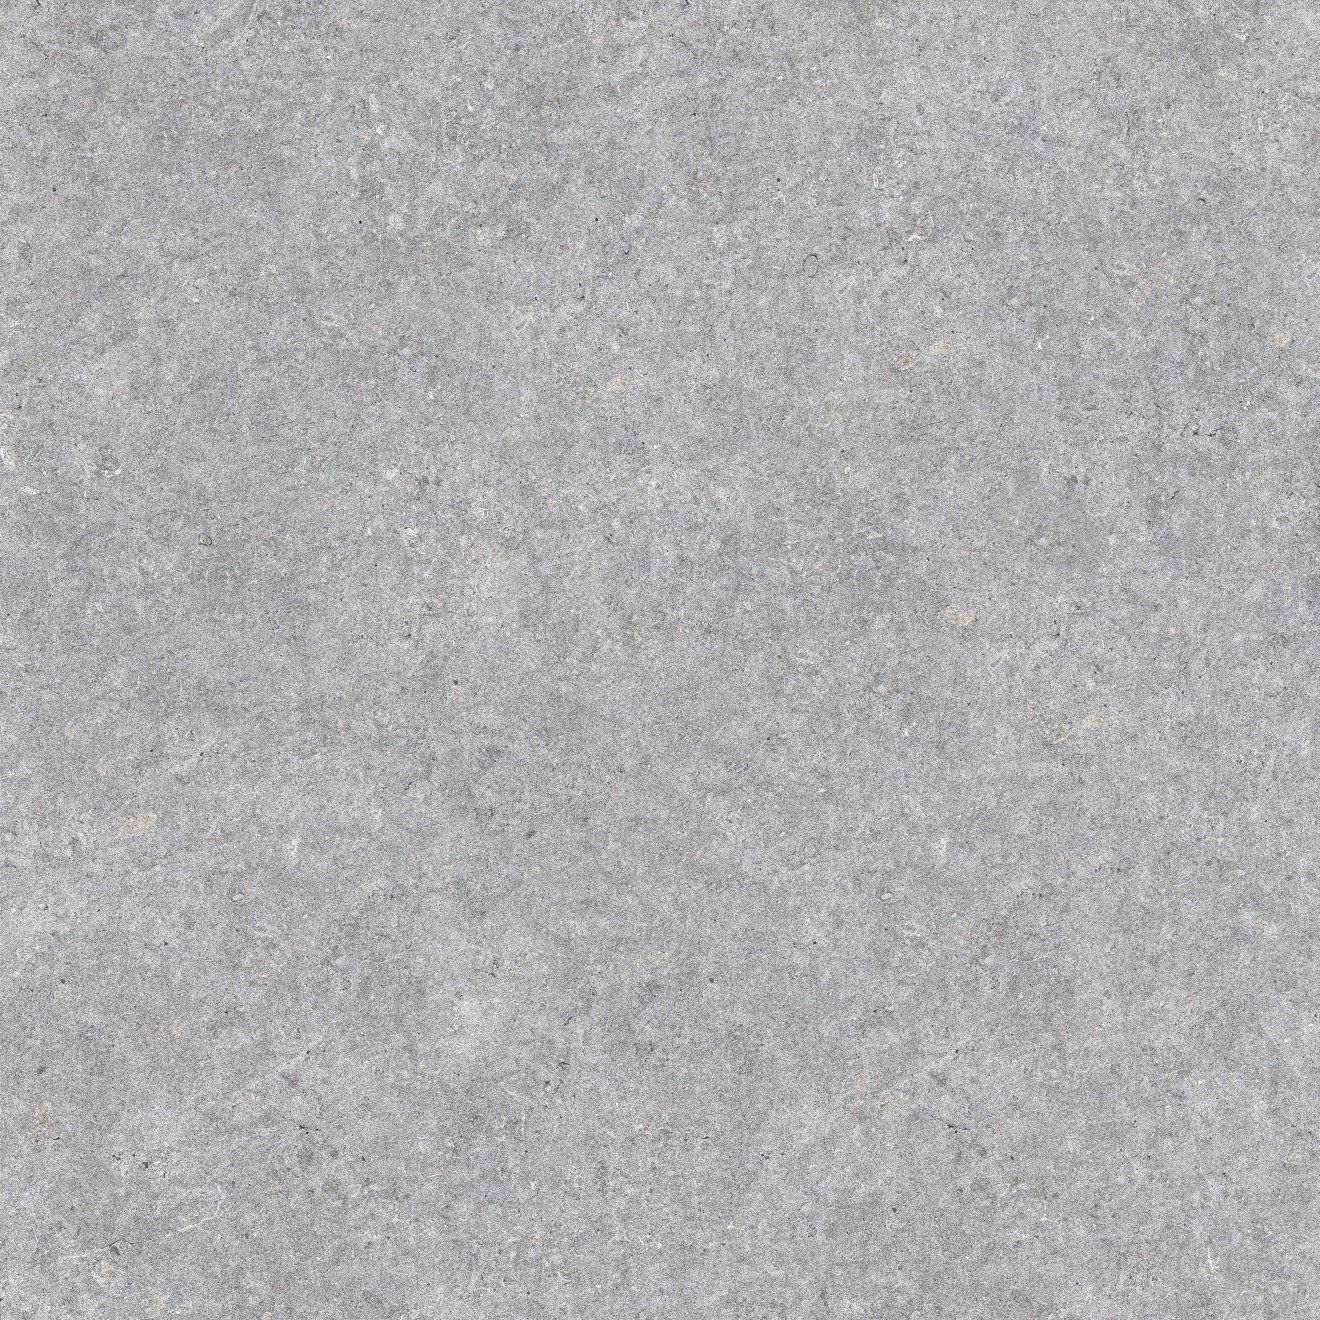 Magnifica Nineteen Forty-Eight 48" x 48" - 8mm Polished Porcelain Tile in Shell Beach | Bedrosians Tile & Stone